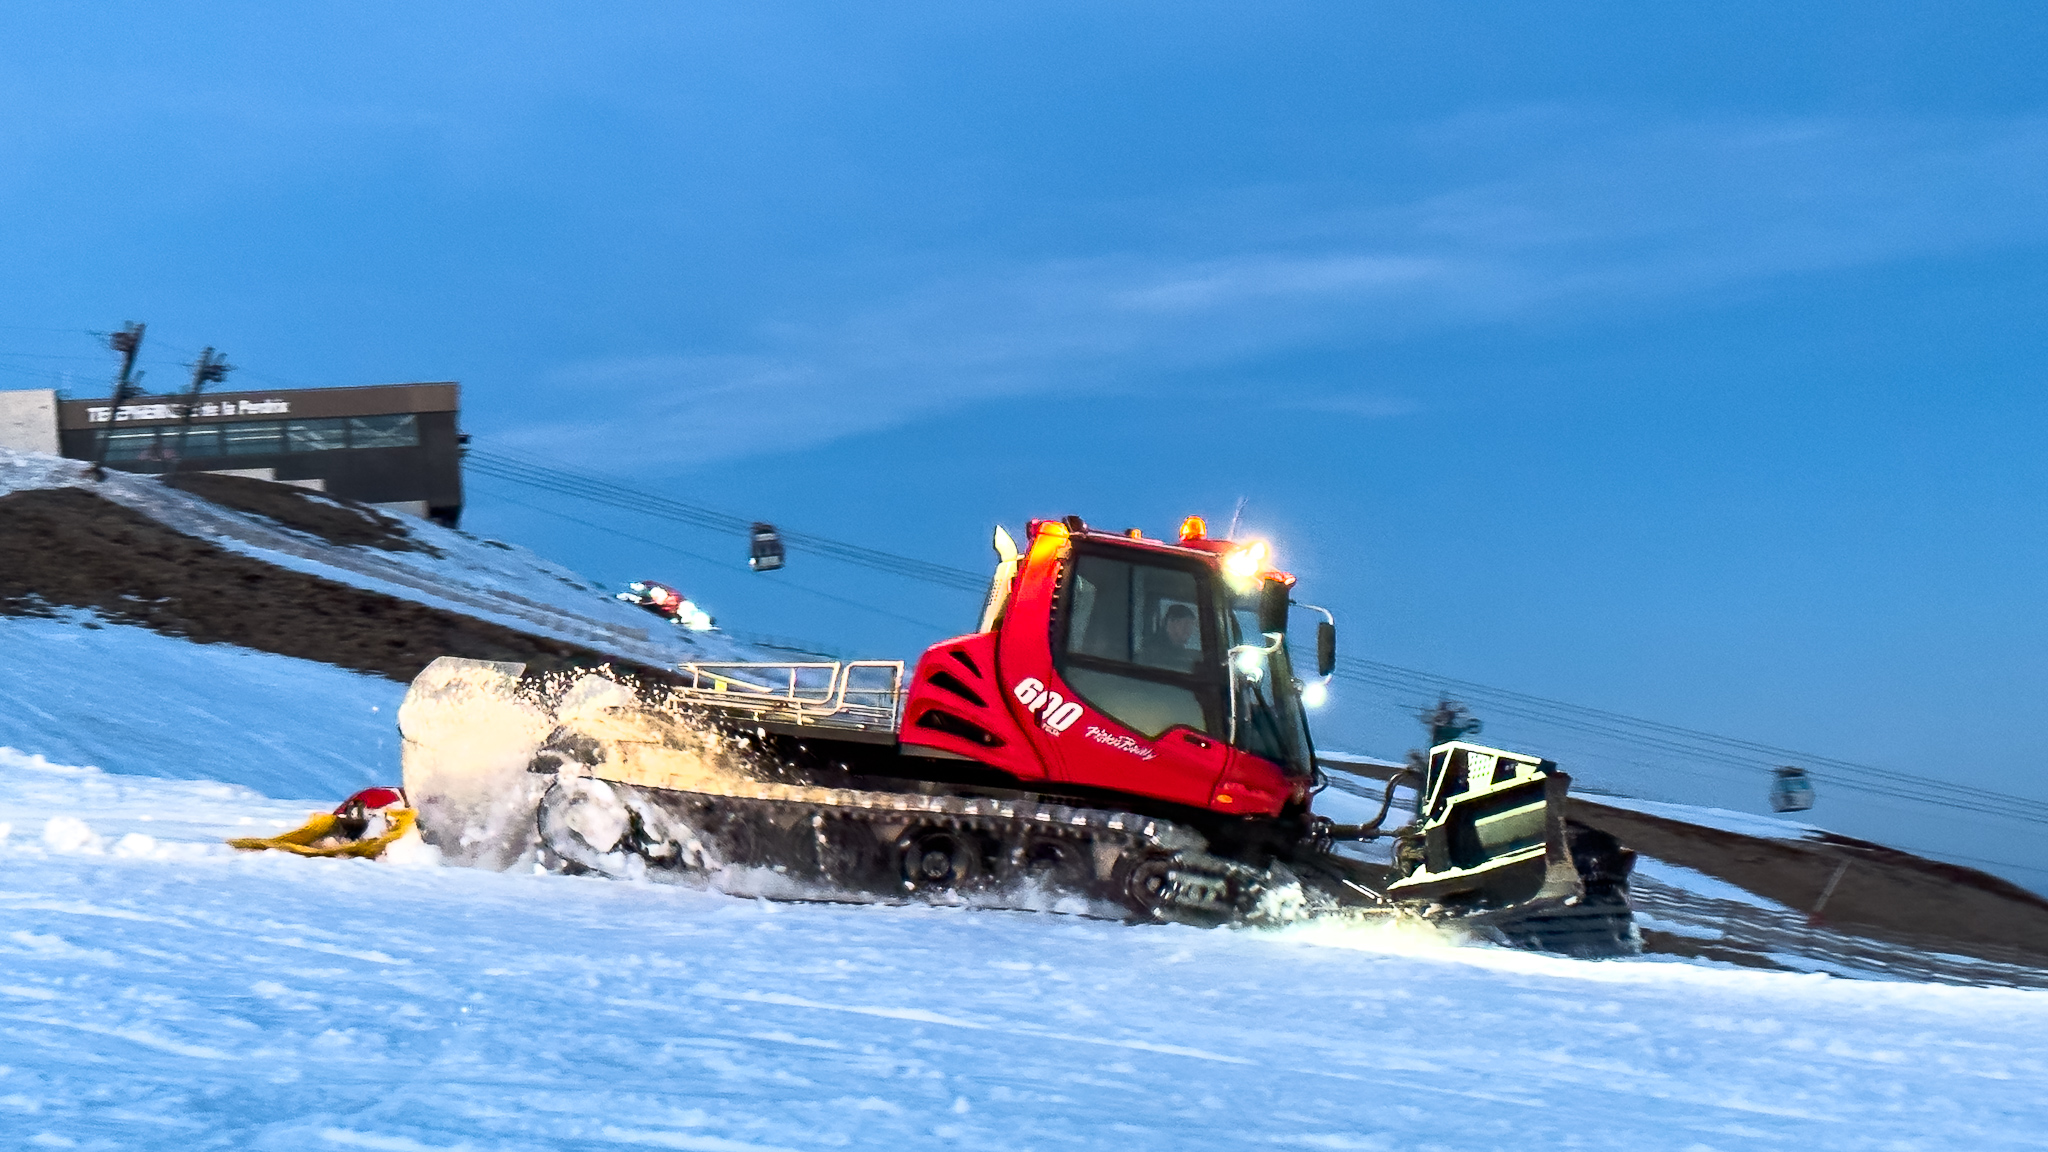 Super Besse ski resort, preparation of the slopes by snow groomers